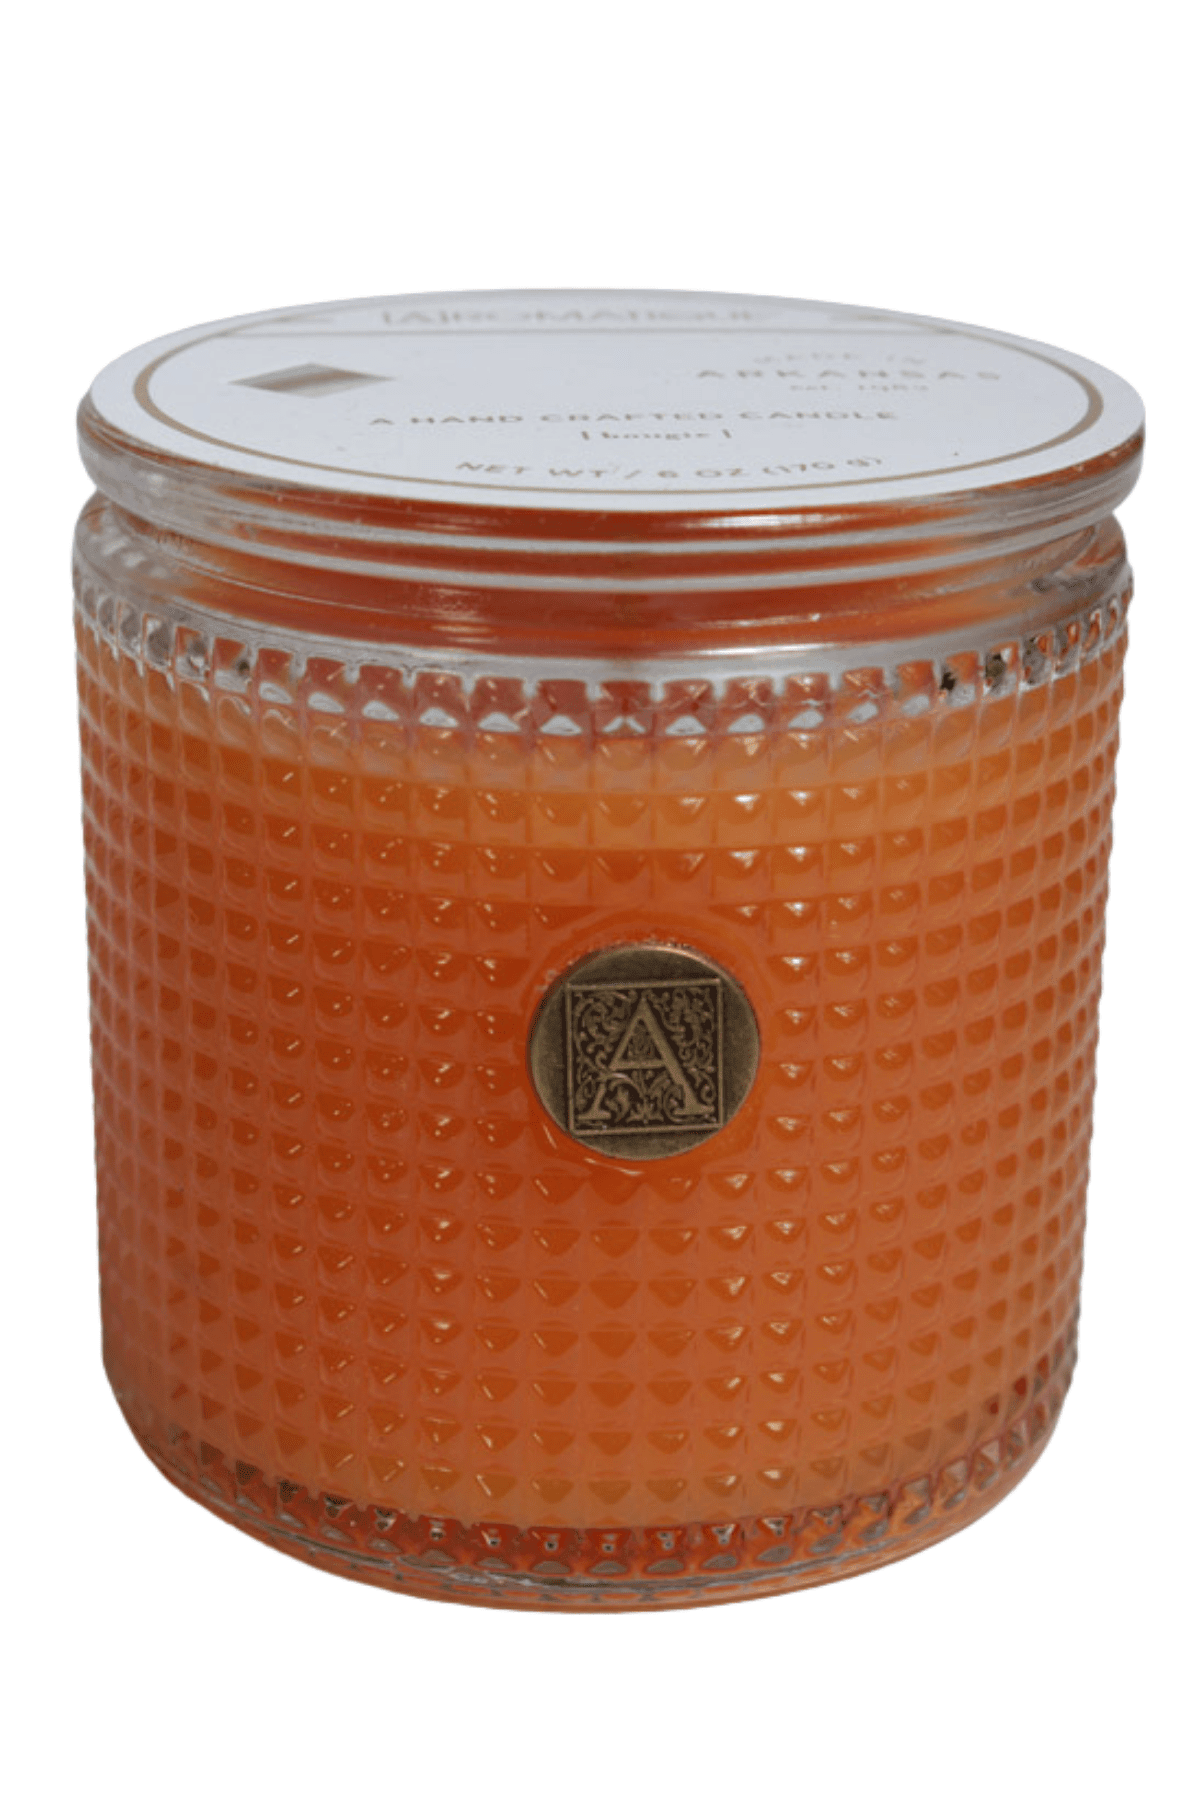 cylinder-shaped, textured glass candle in a Valencia Orange fragrance